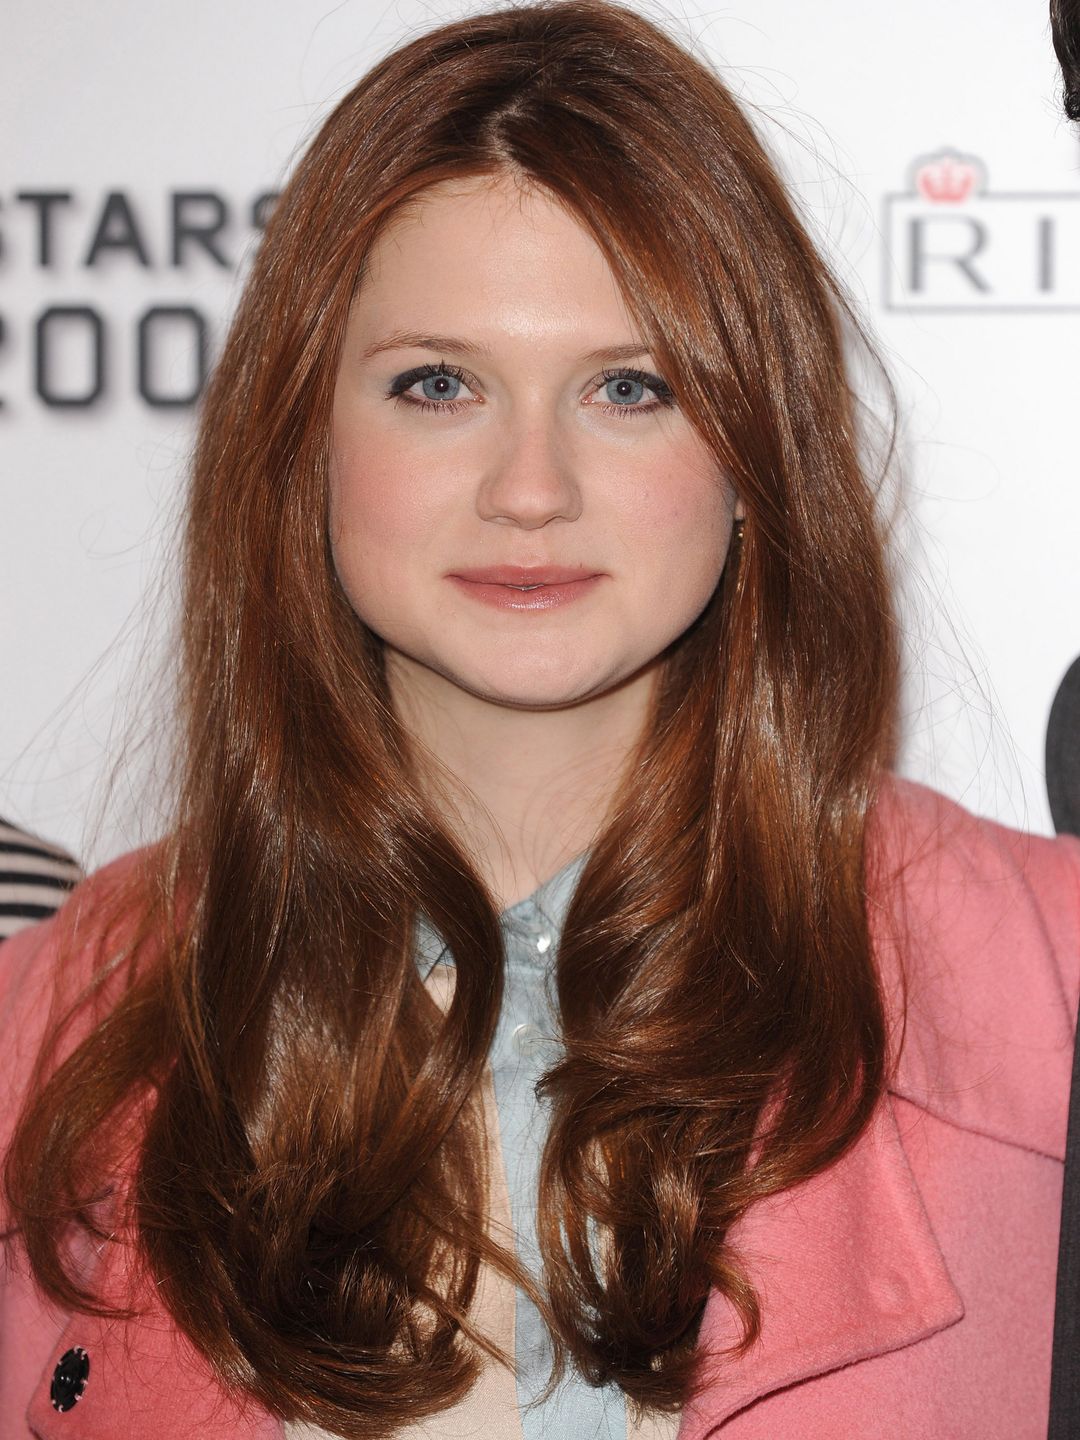 Bonnie Wright how did she became famous